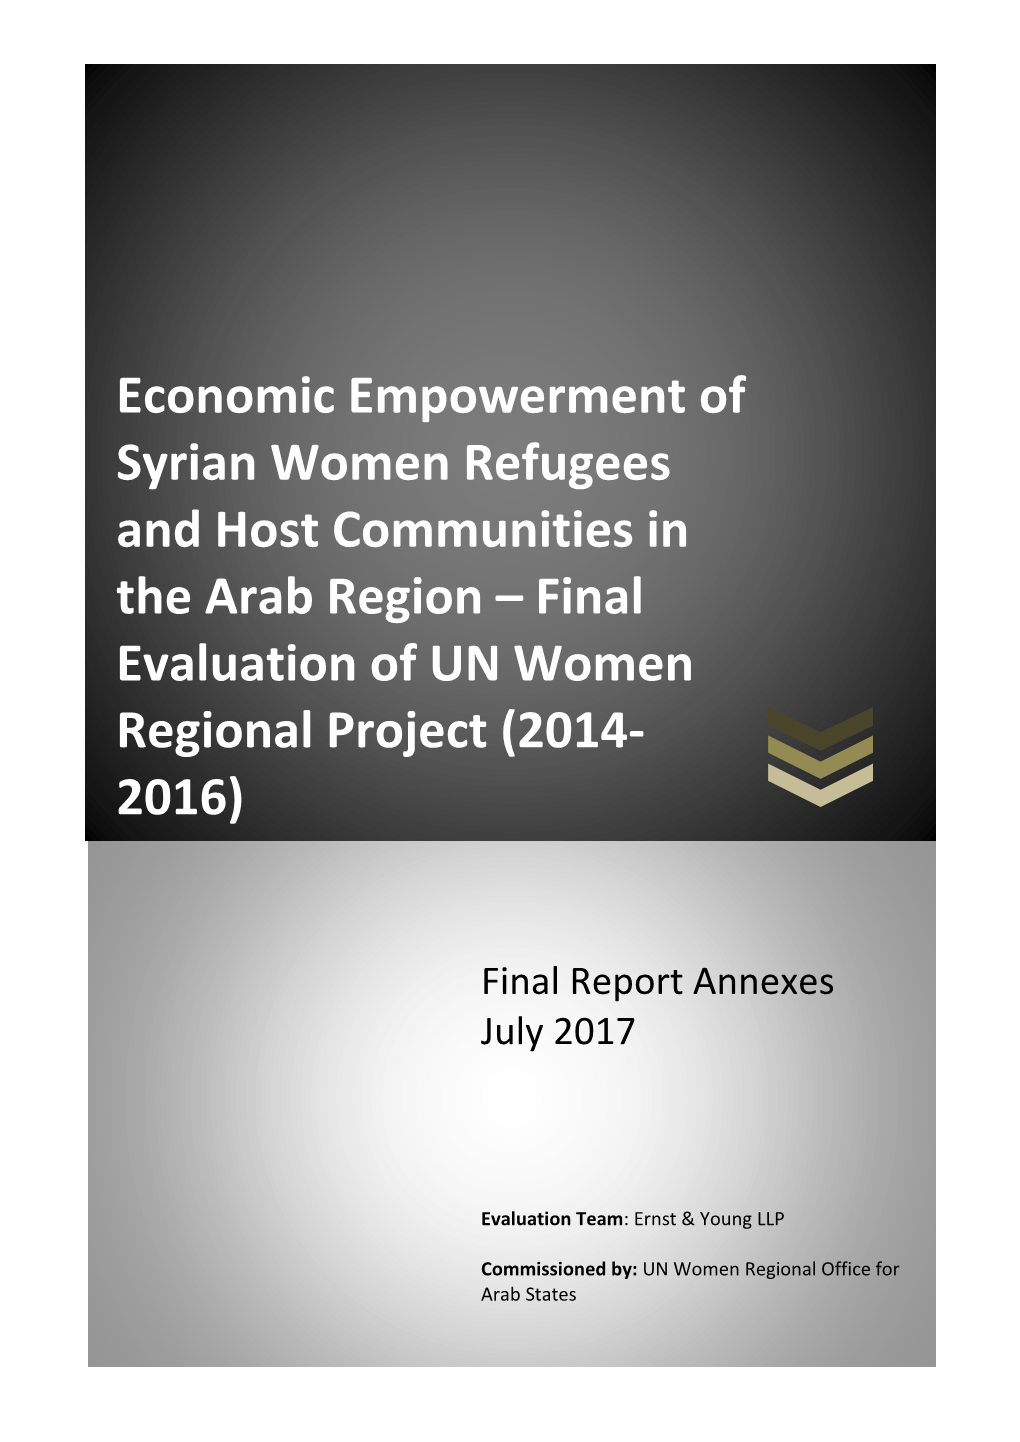 Syrian WEE Regional Project Final Evaluation Annexes.Pdf